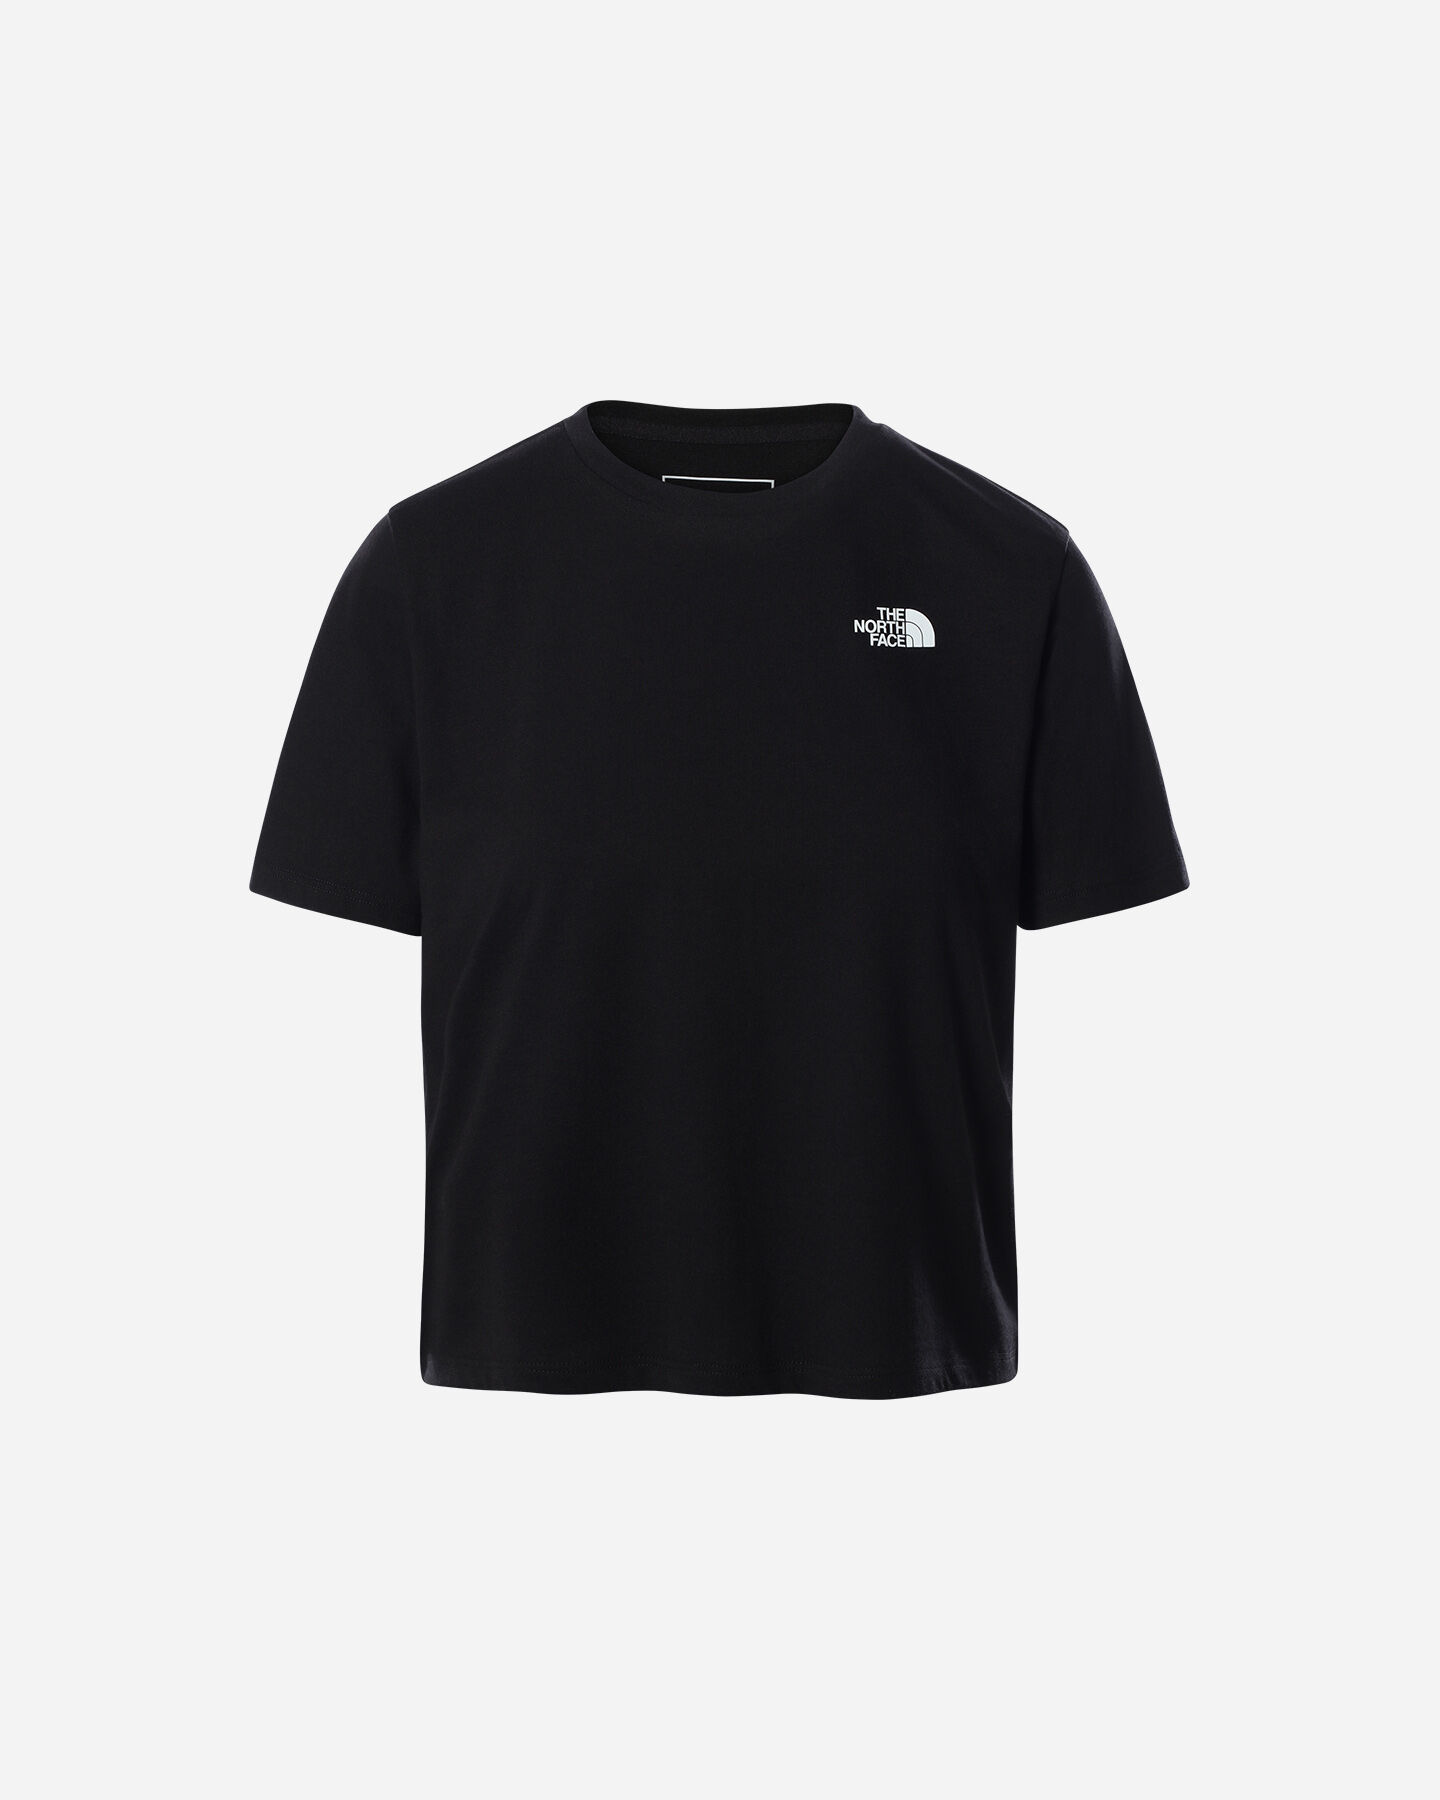  T-Shirt THE NORTH FACE CROP SMALL LOGO W S5347948 scatto 0